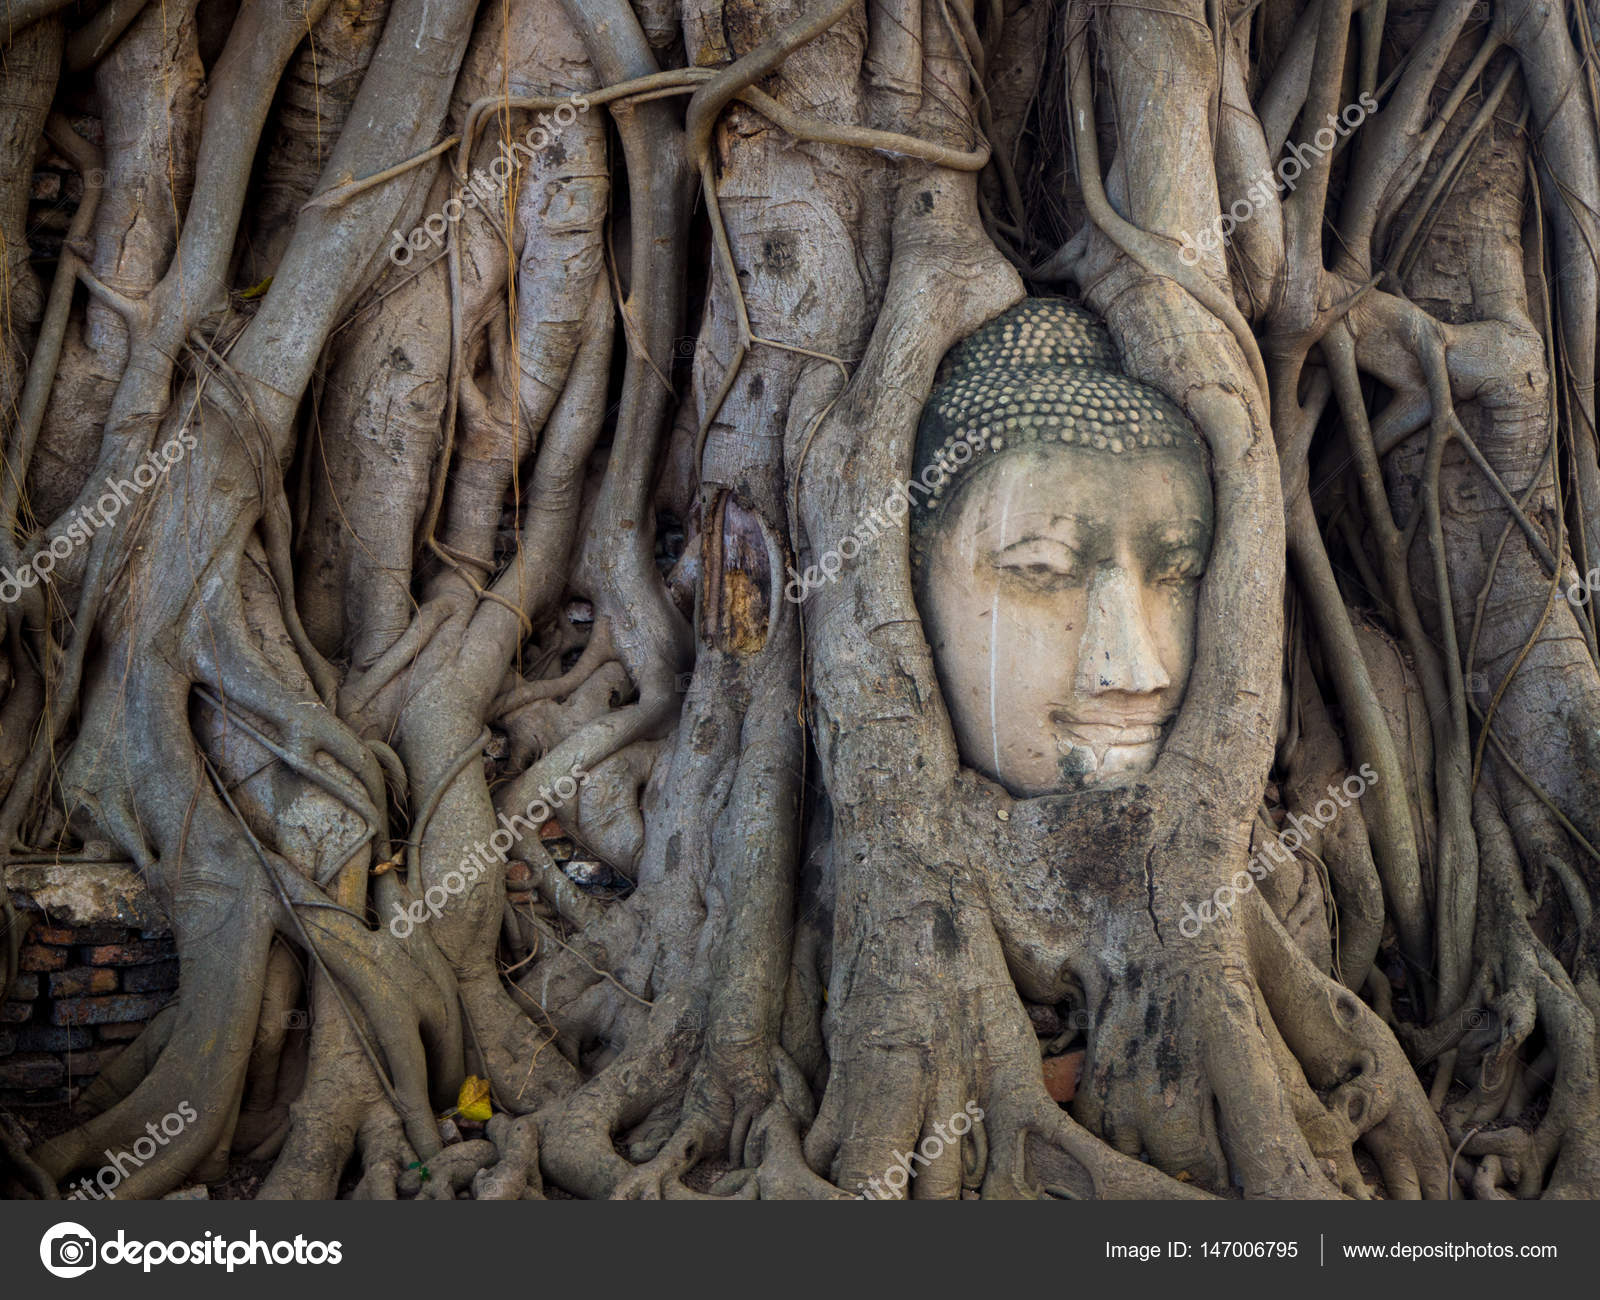 Unseen Thailand Head of Sandstone Buddha within Tree Roots at W ...